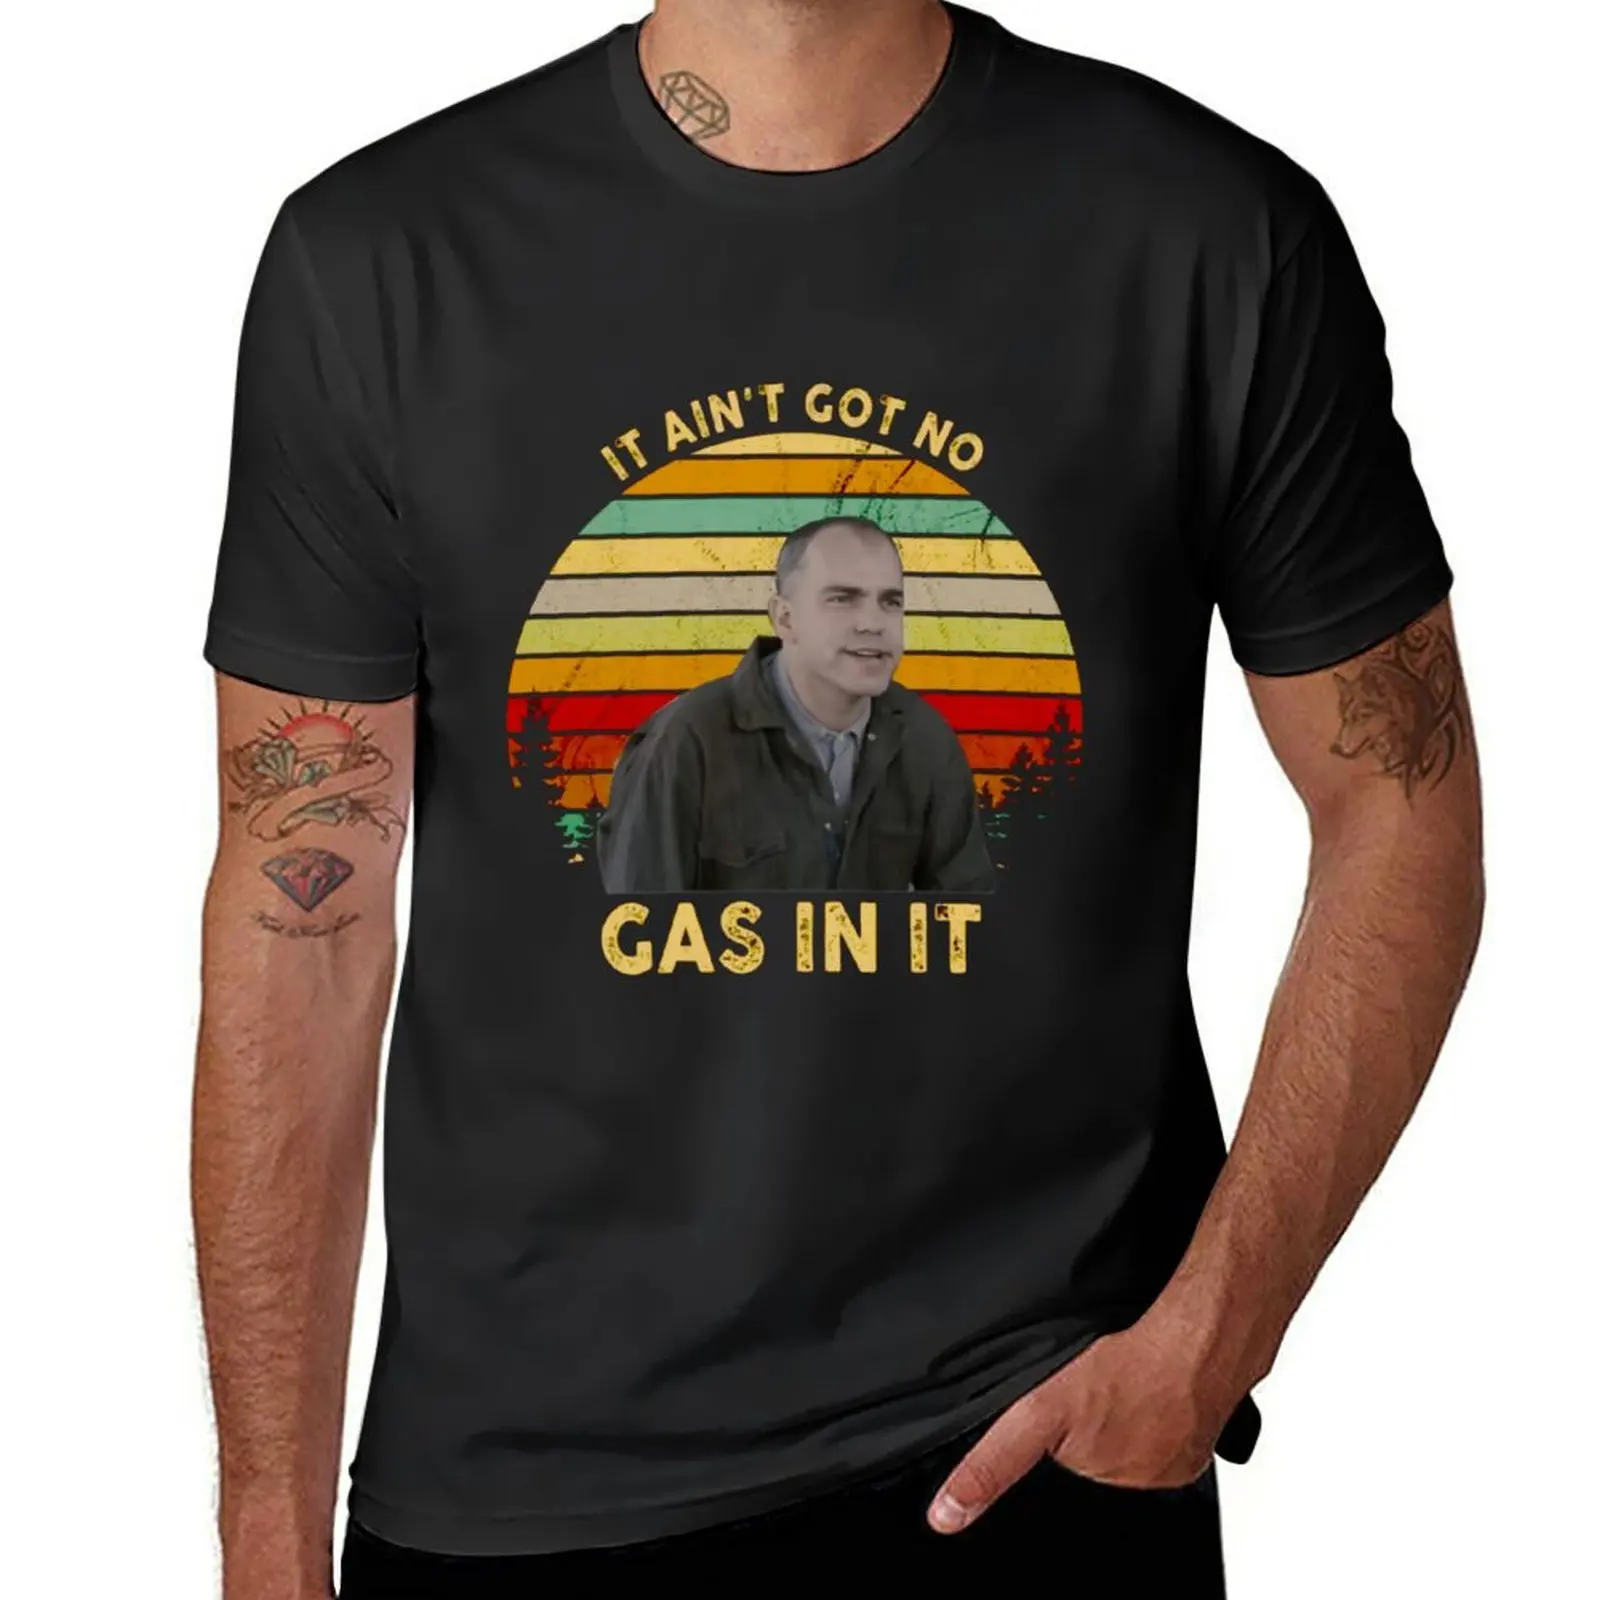 

New It Ain t Got No Gas in It Sling Blade Vintage T-Shirt sublime t shirt hippie clothes mens t shirts